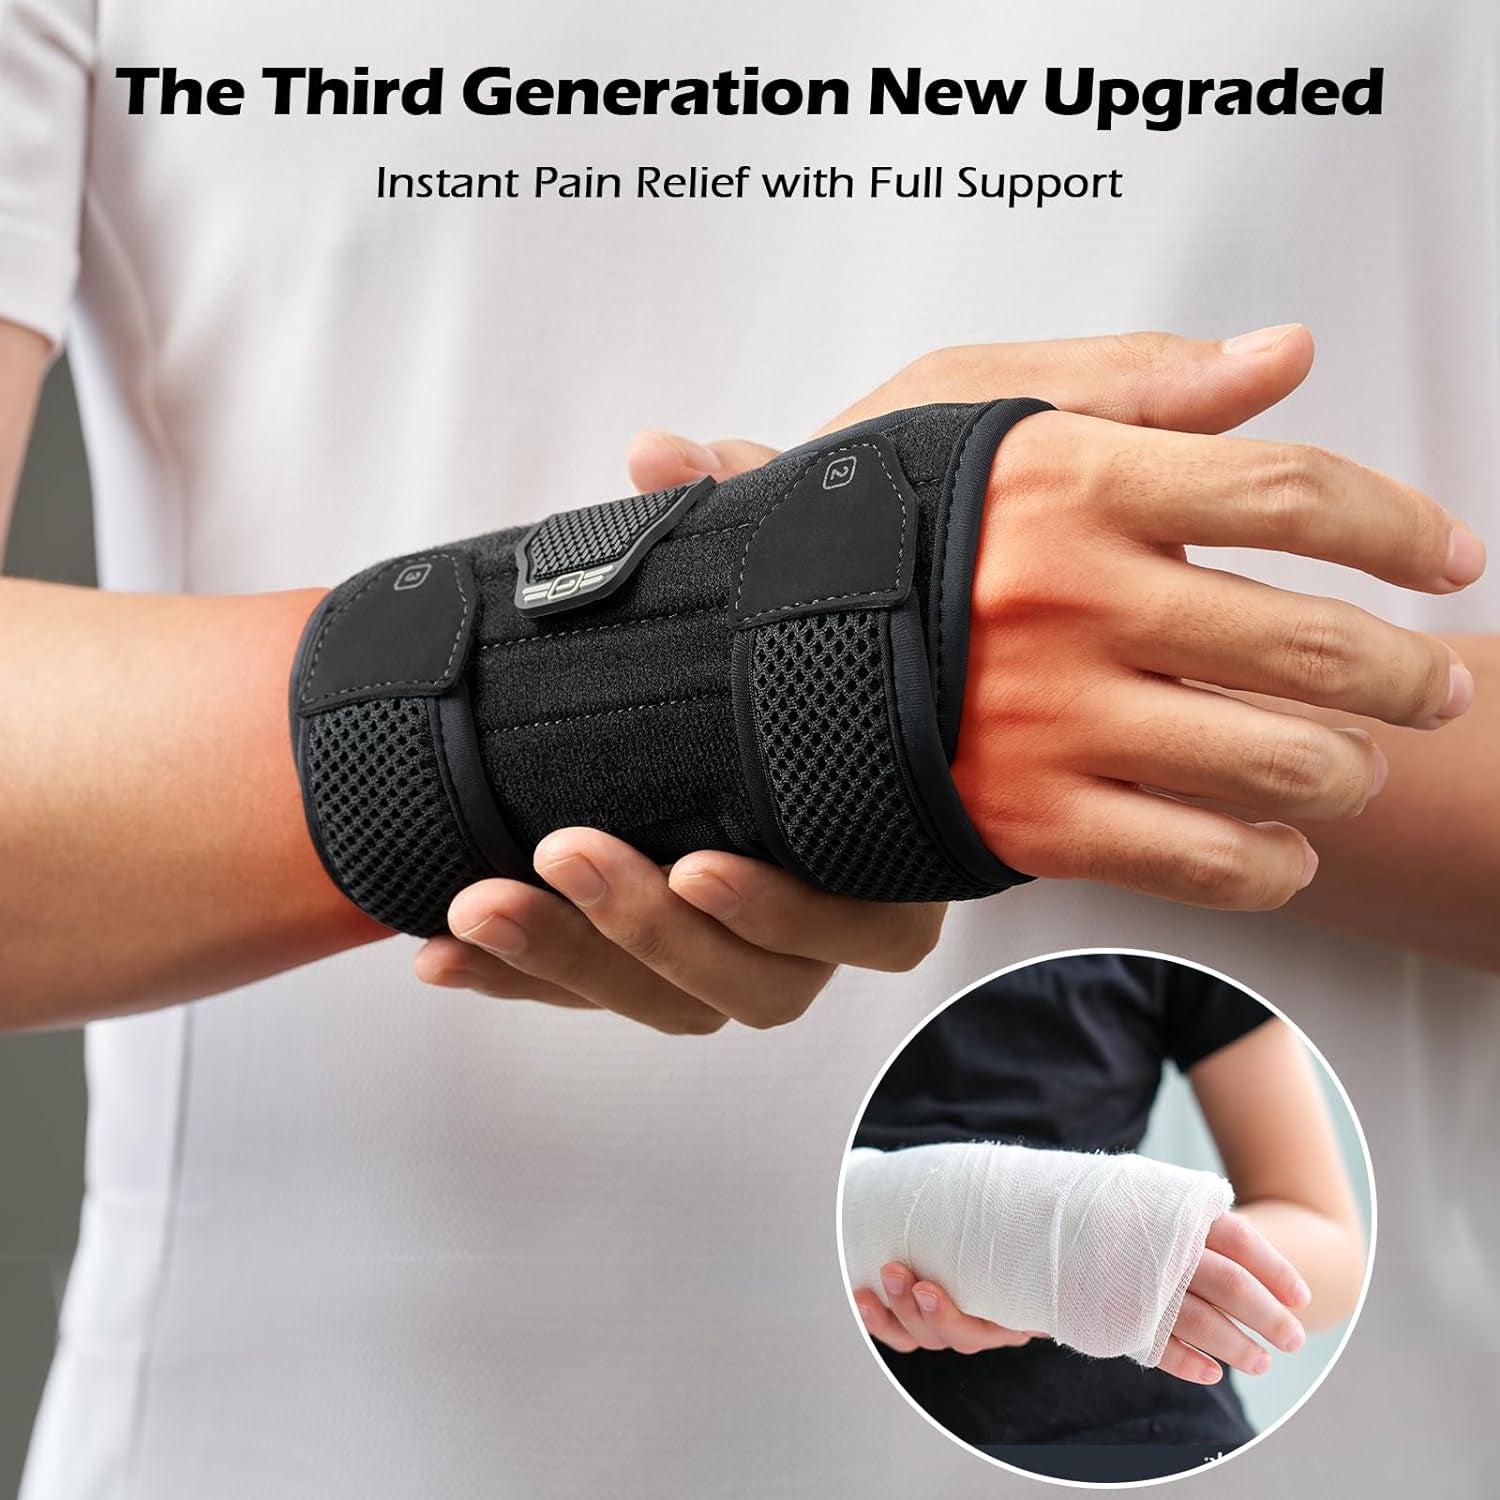 Stable Version Wrist Support with 3 Metal Stays, Comfy Carpal Tunnel Wrist Splint with Soft Pad for Daily Use, Breathable Wrist Support Brace Fit Right Hand for Arthritis,Rsi,Sprain Recovery